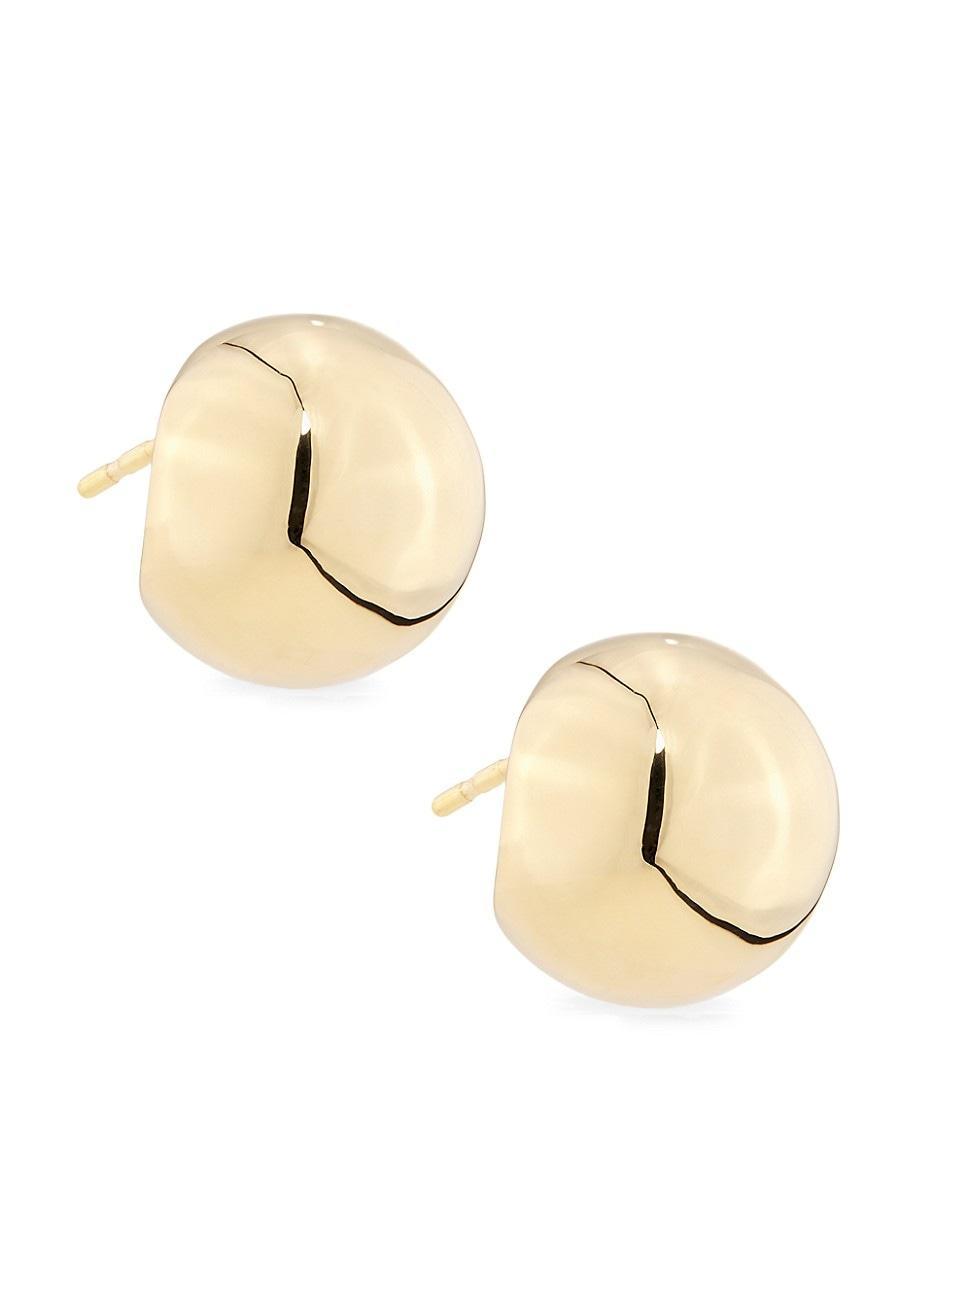 Womens 14K Yellow Gold Ball Stud Earrings Product Image